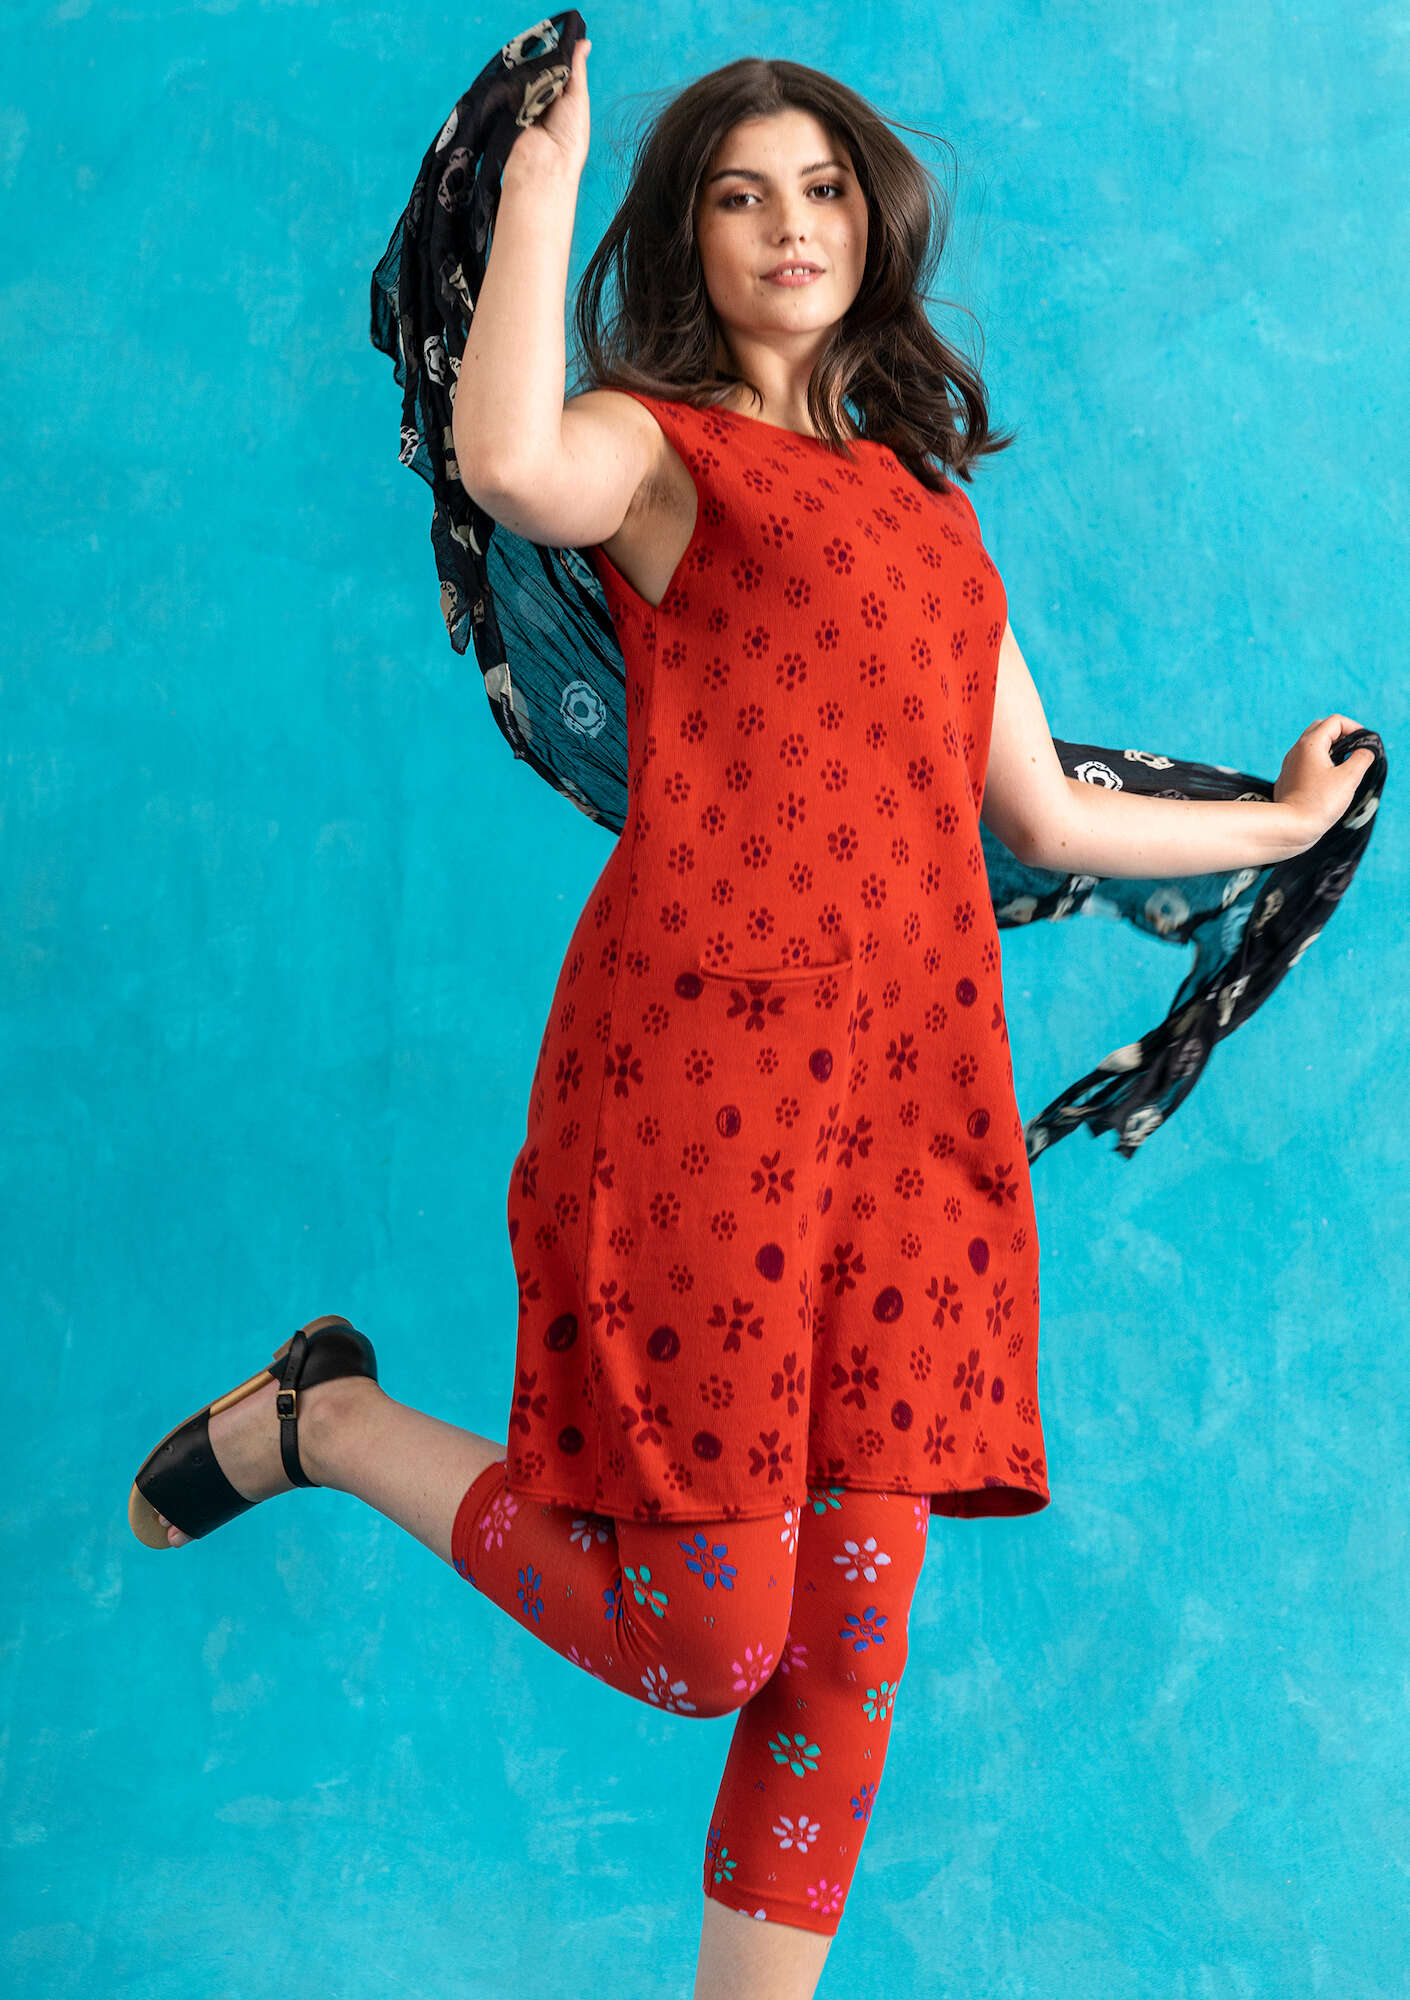 “Iris” knit fabric tunic in organic/recycled cotton parrot red/patterned